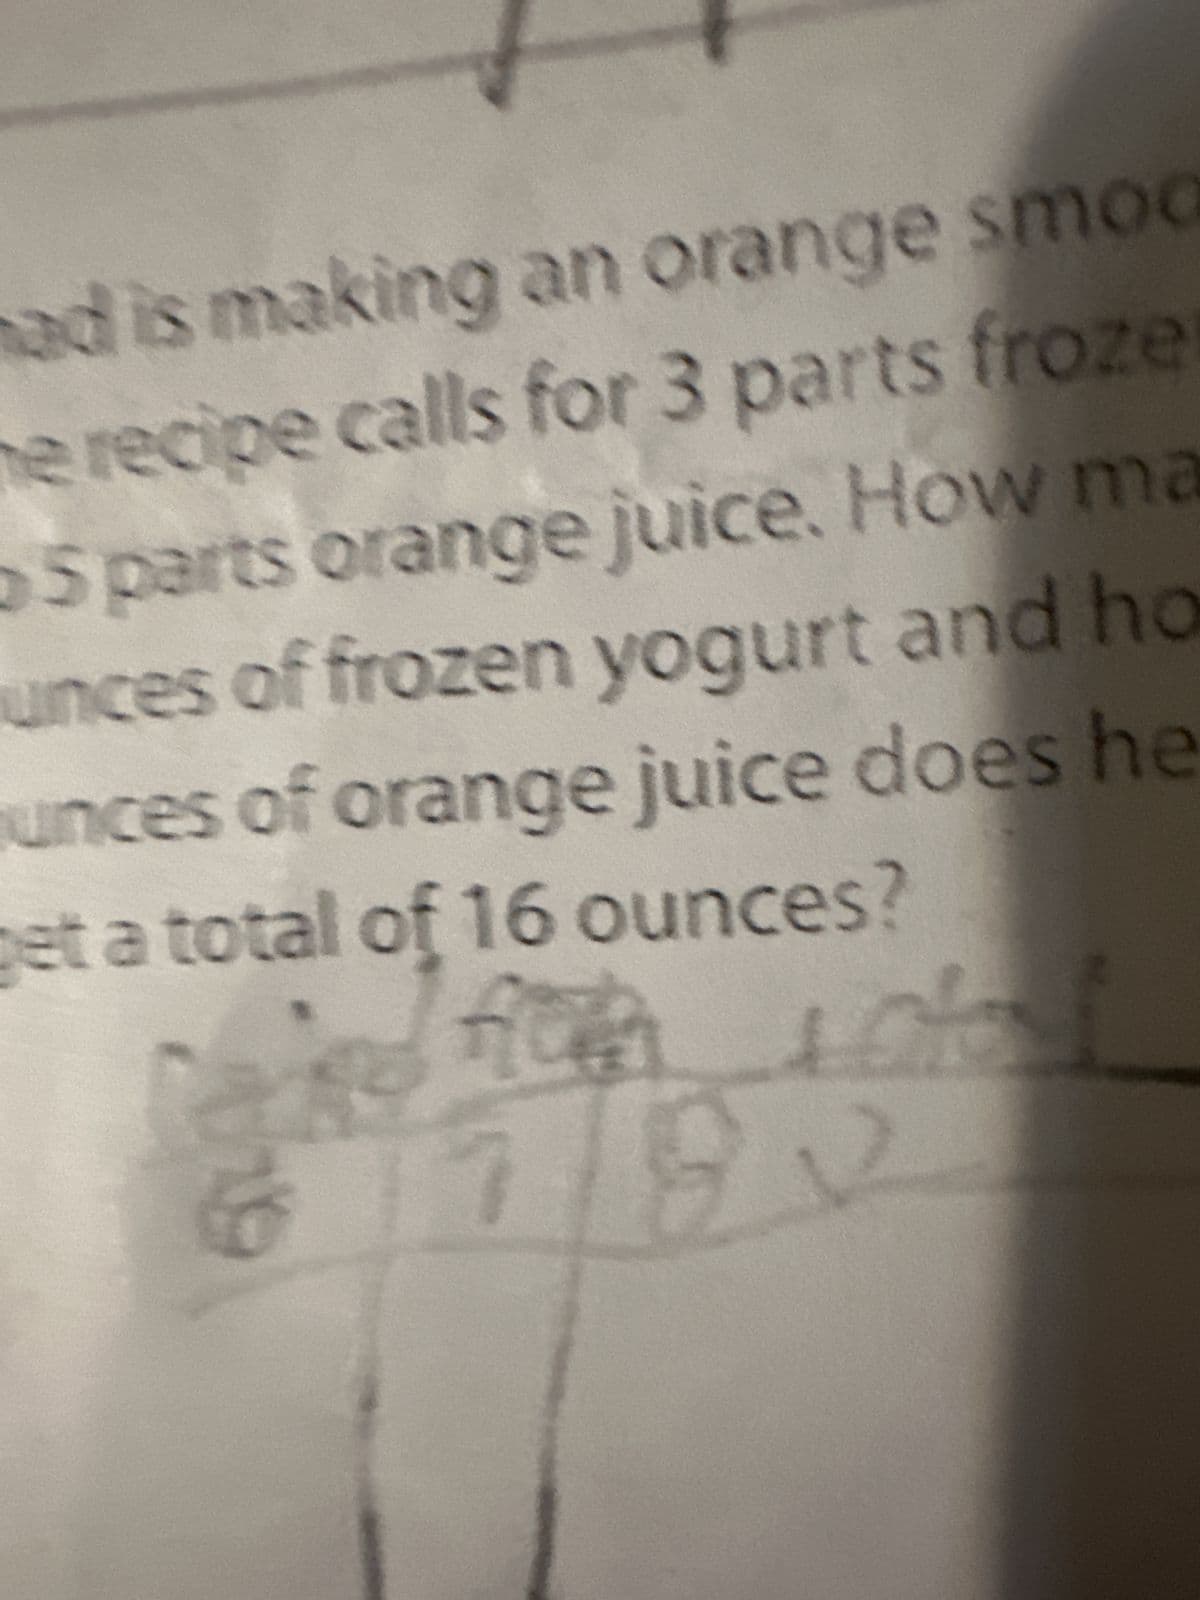 ad is making an orange smoo
he recipe calls for 3 parts froze
5 parts orange juice. How ma
unces of frozen yogurt and ho
unces of orange juice does he
et a total of 16 ounces?
C
e non to
6792